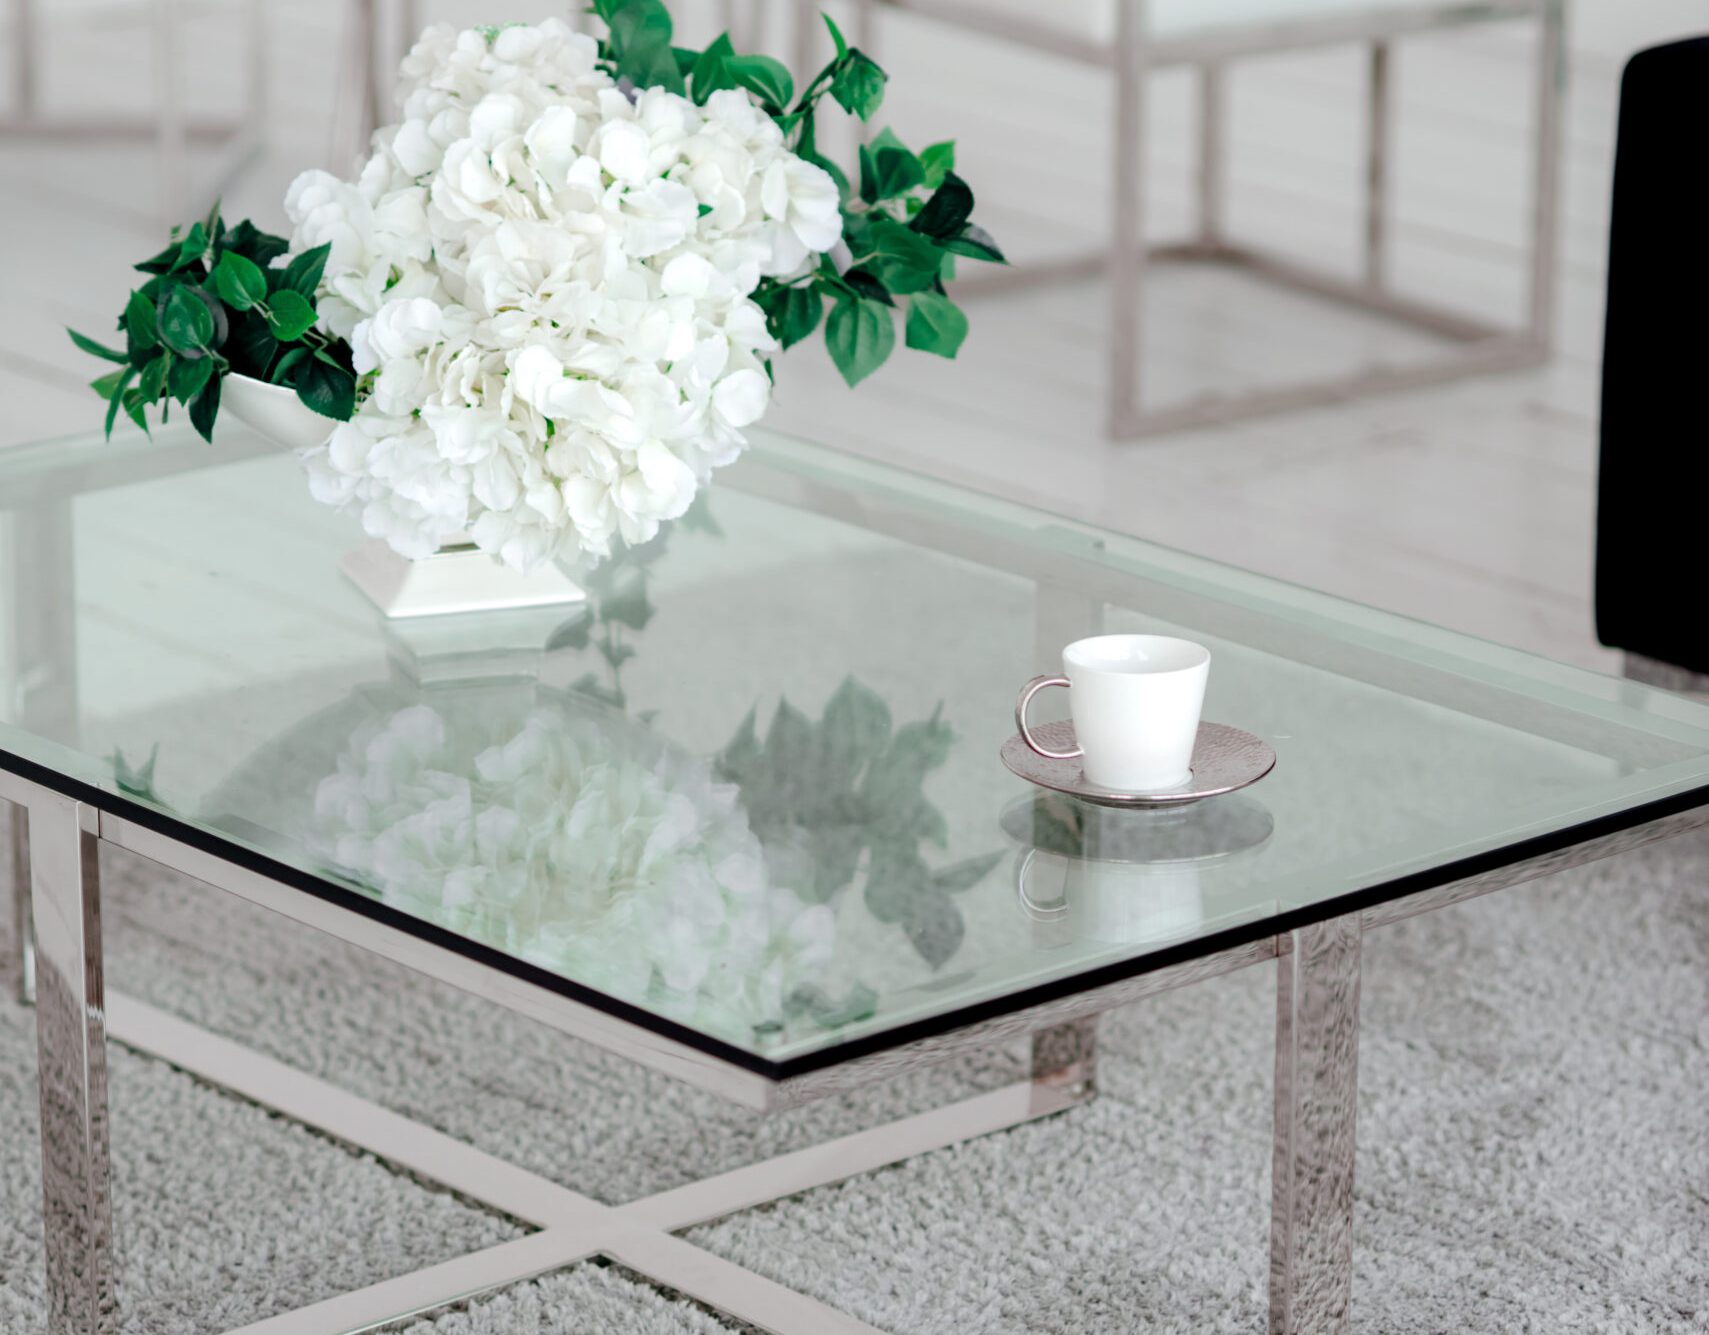 Fragment of a luxurious interior of a modern apartment. White wall, glass table, composition of white flowers and a navy sofa.